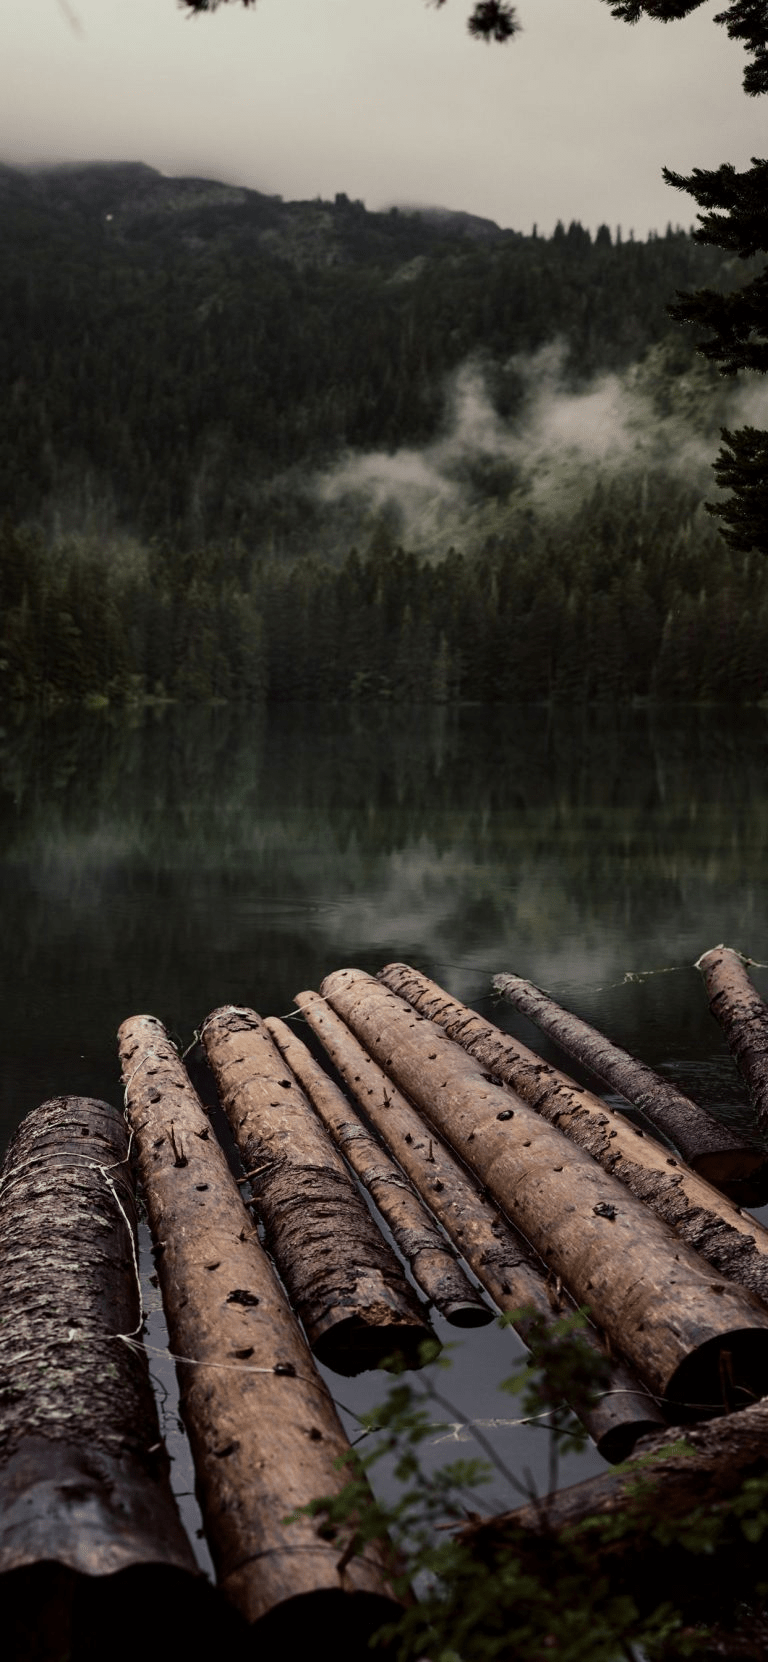 Calming Phone Backgrounds